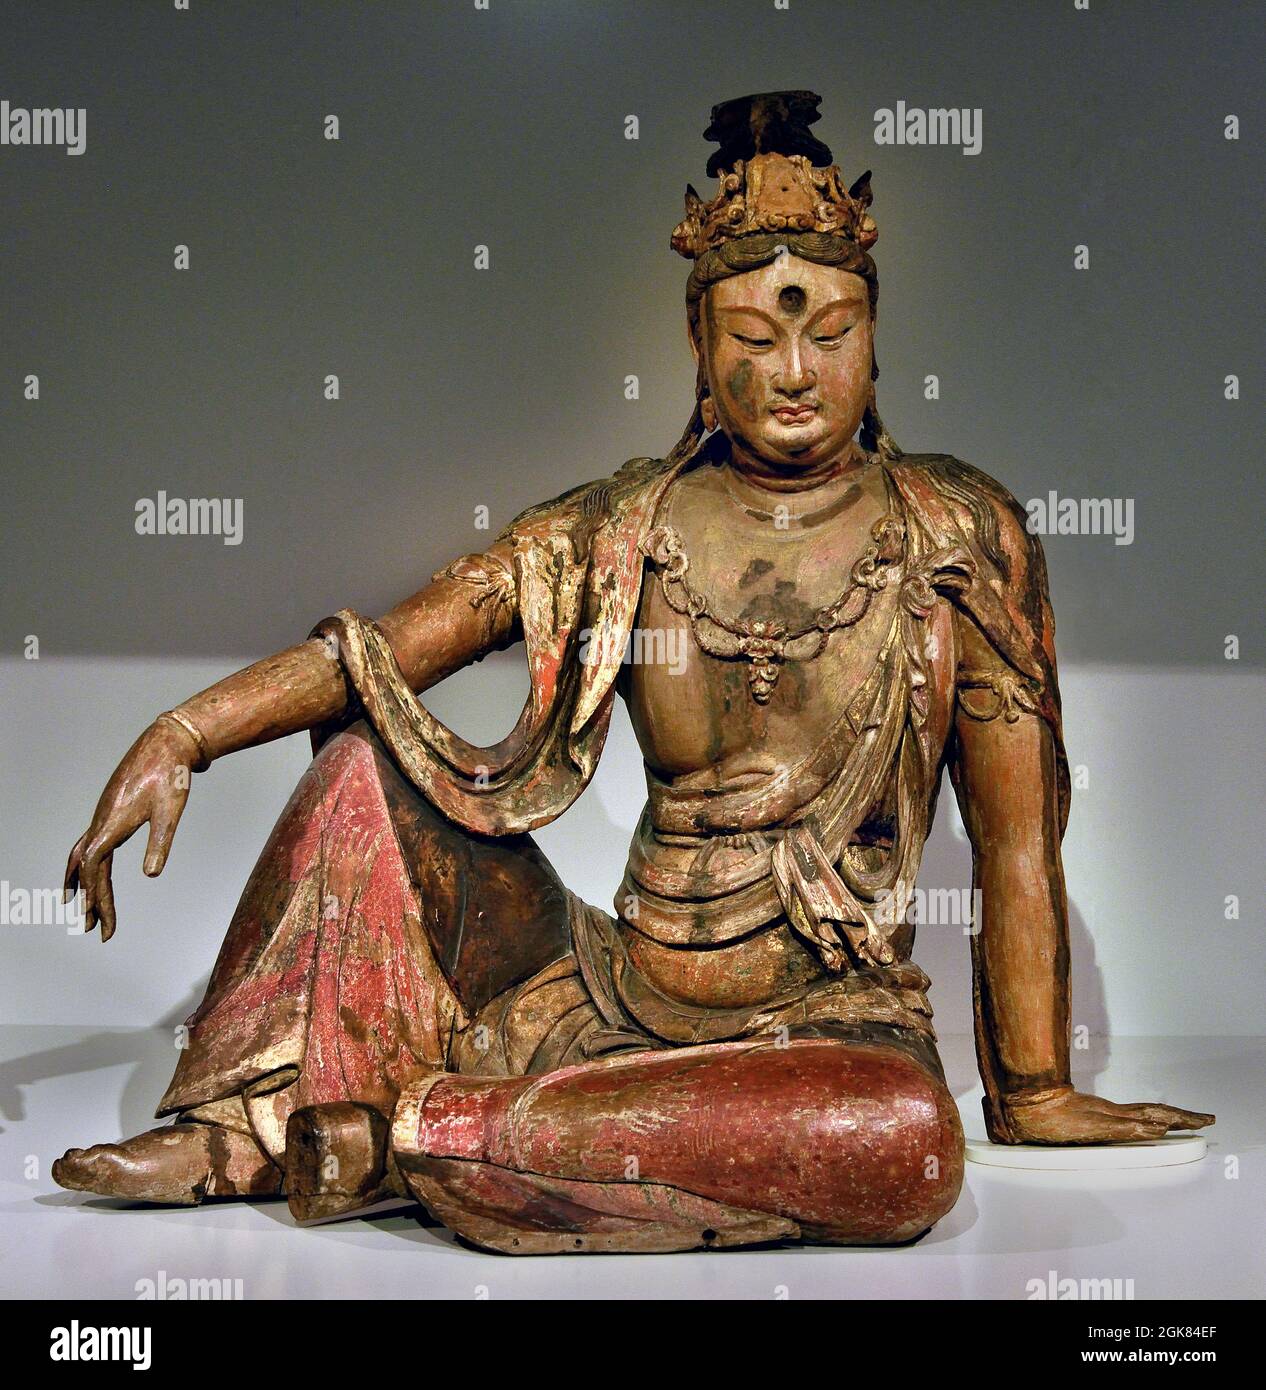 Shanxi. 1100 - 1200 Liao-dynasty (907-1125) / Jin-dynasty (1115-1234) Asia, China, (Buddhist deity Guanyin, savior of people in danger, depicted meditating on a rock. reflection of the moon in water, a symbol of illusion and transience in Buddhism.) Stock Photo